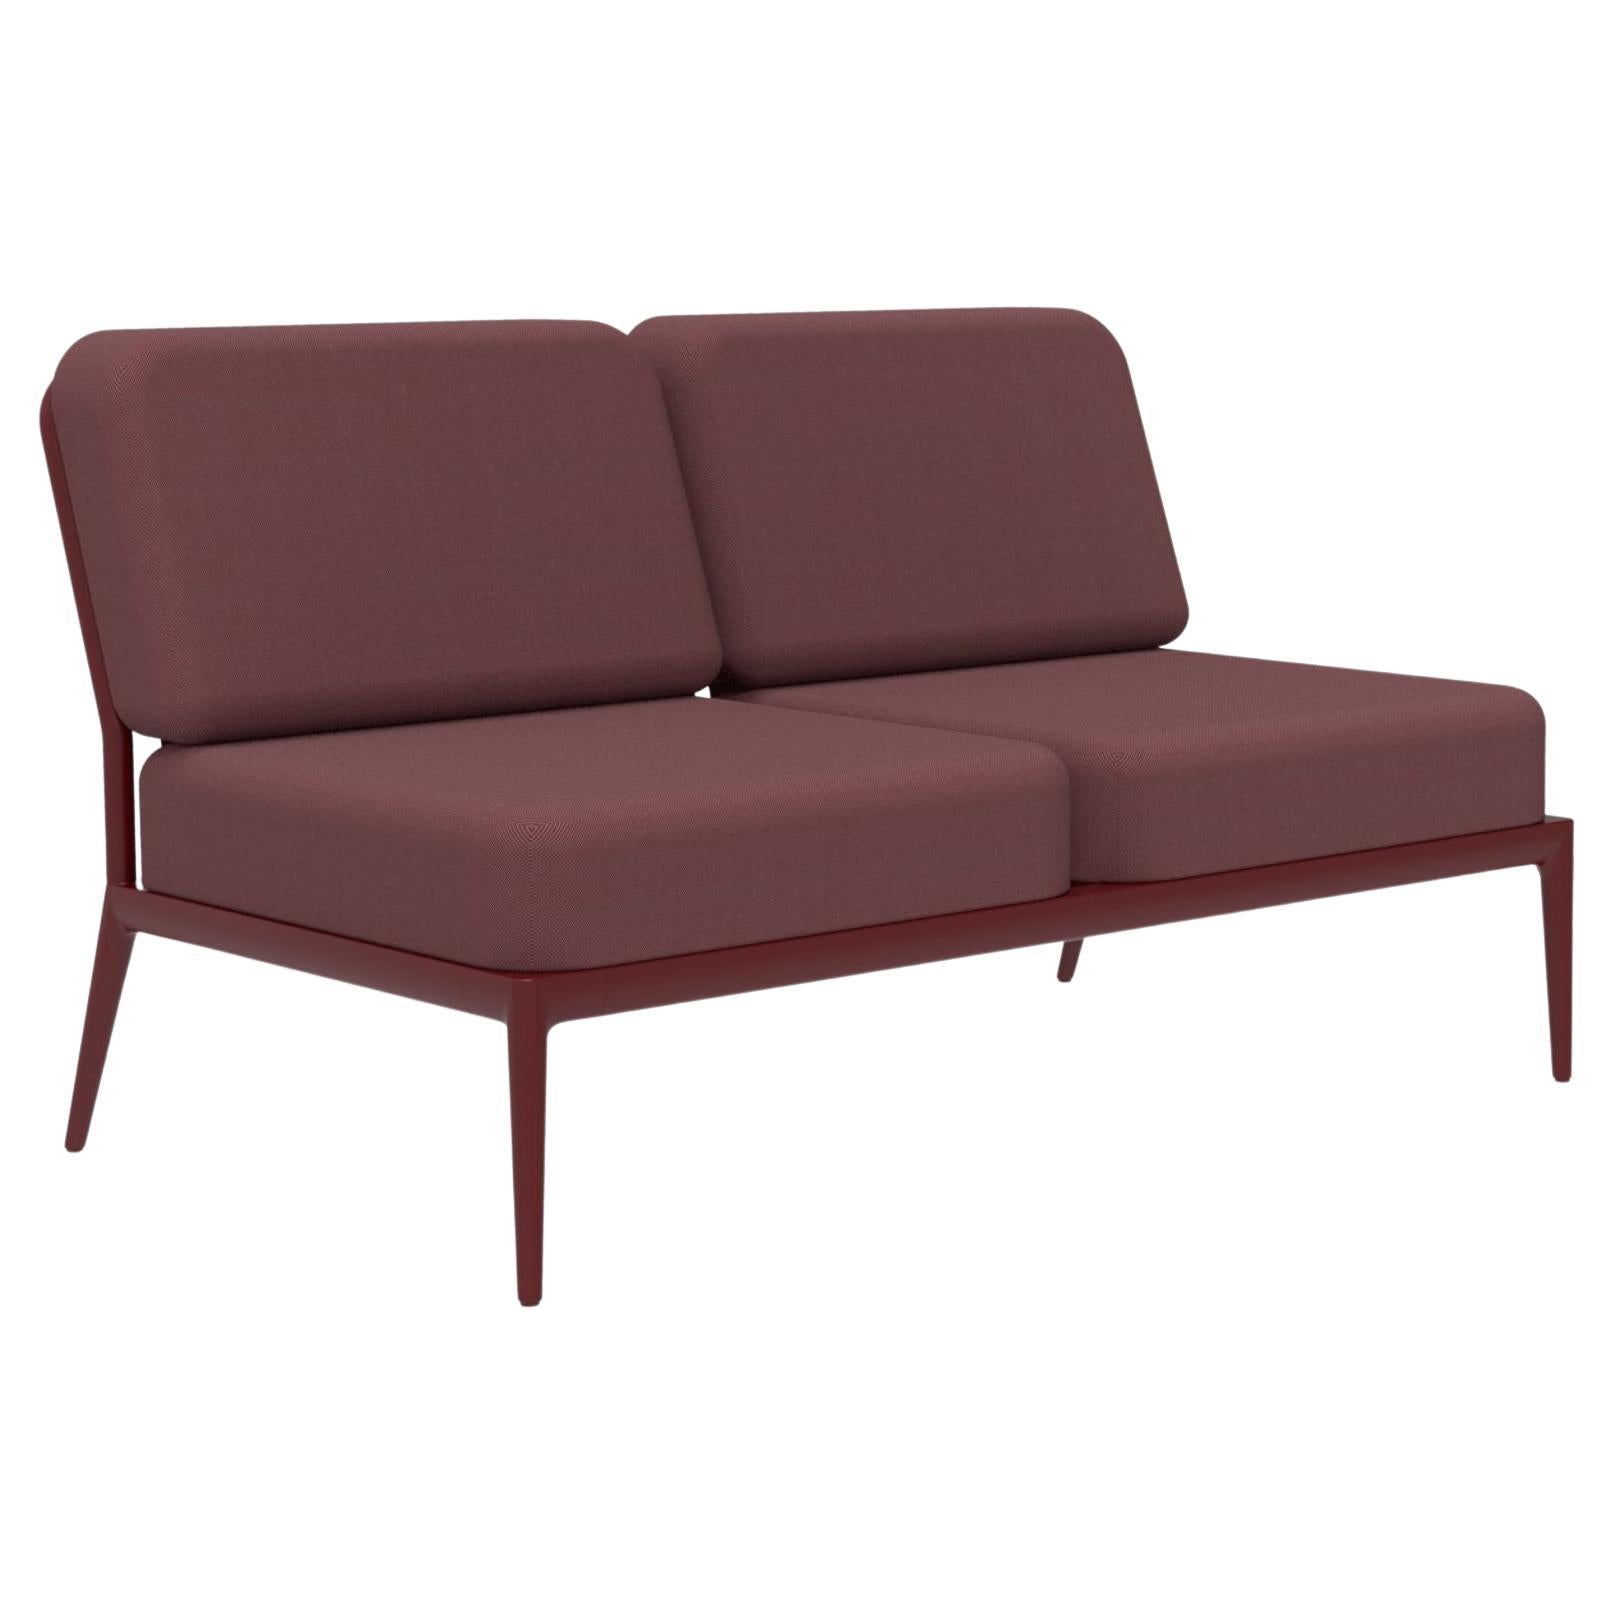 Ribbons Burgundy Double Central Modular Sofa by Mowee For Sale